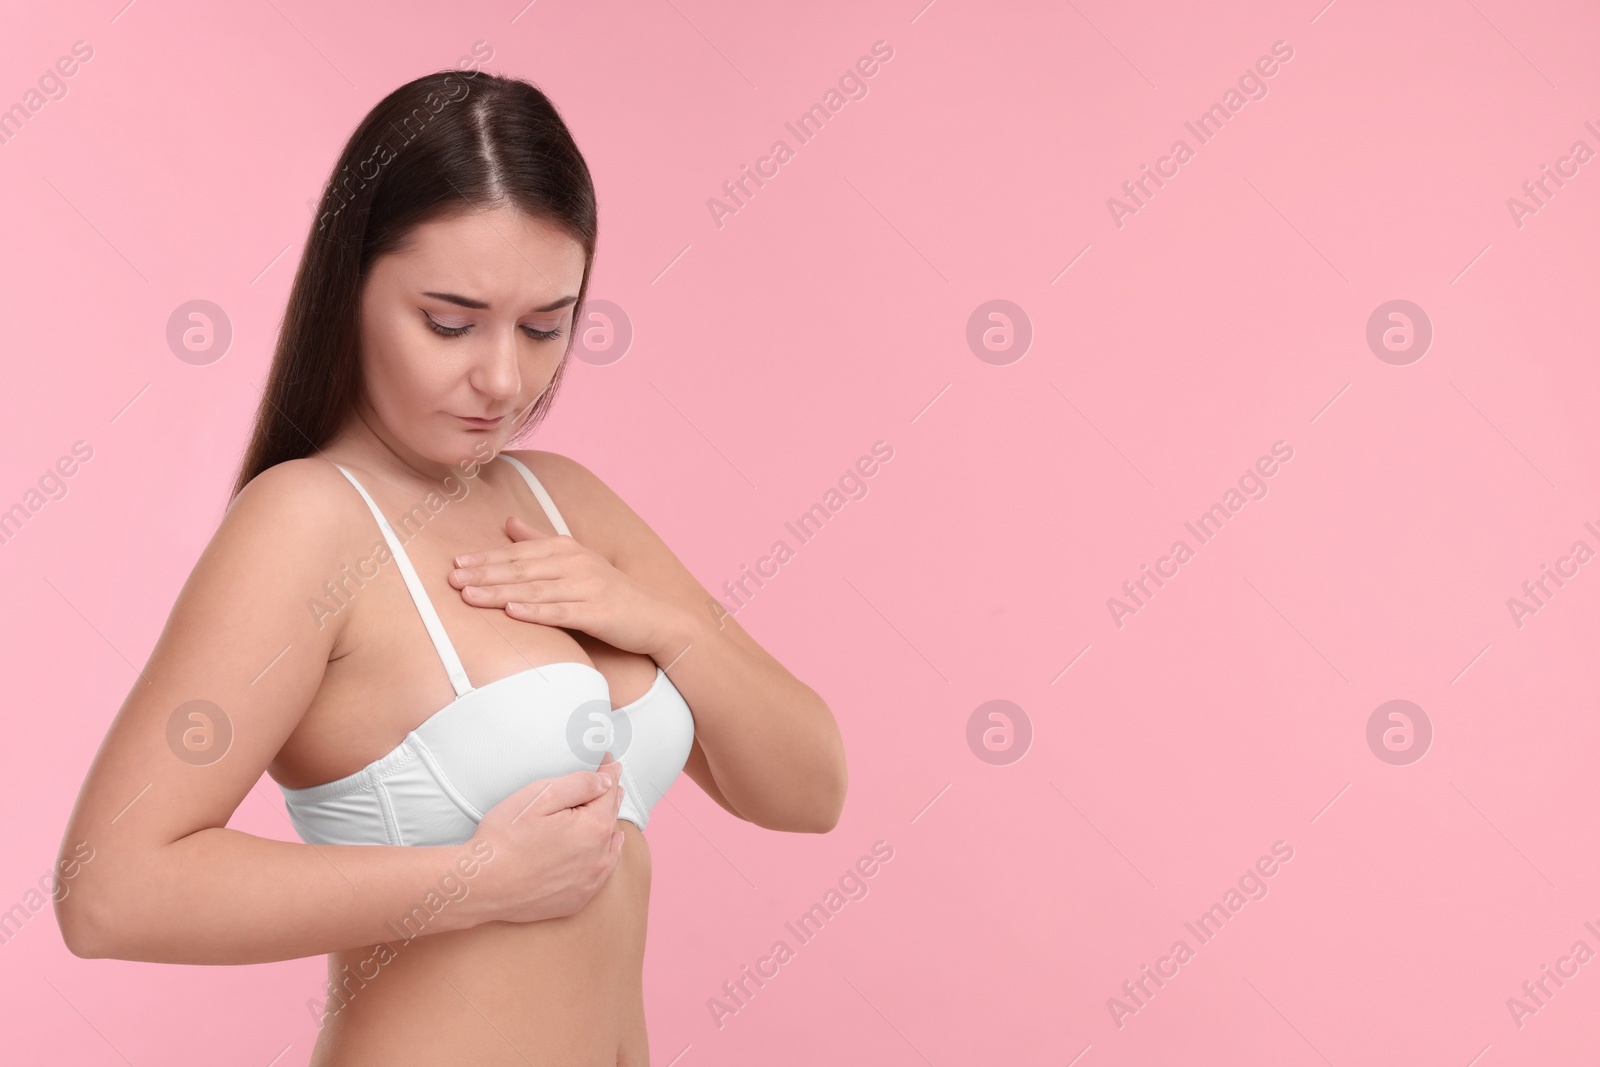 Photo of Mammology. Woman in bra doing breast self-examination on pink background, space for text